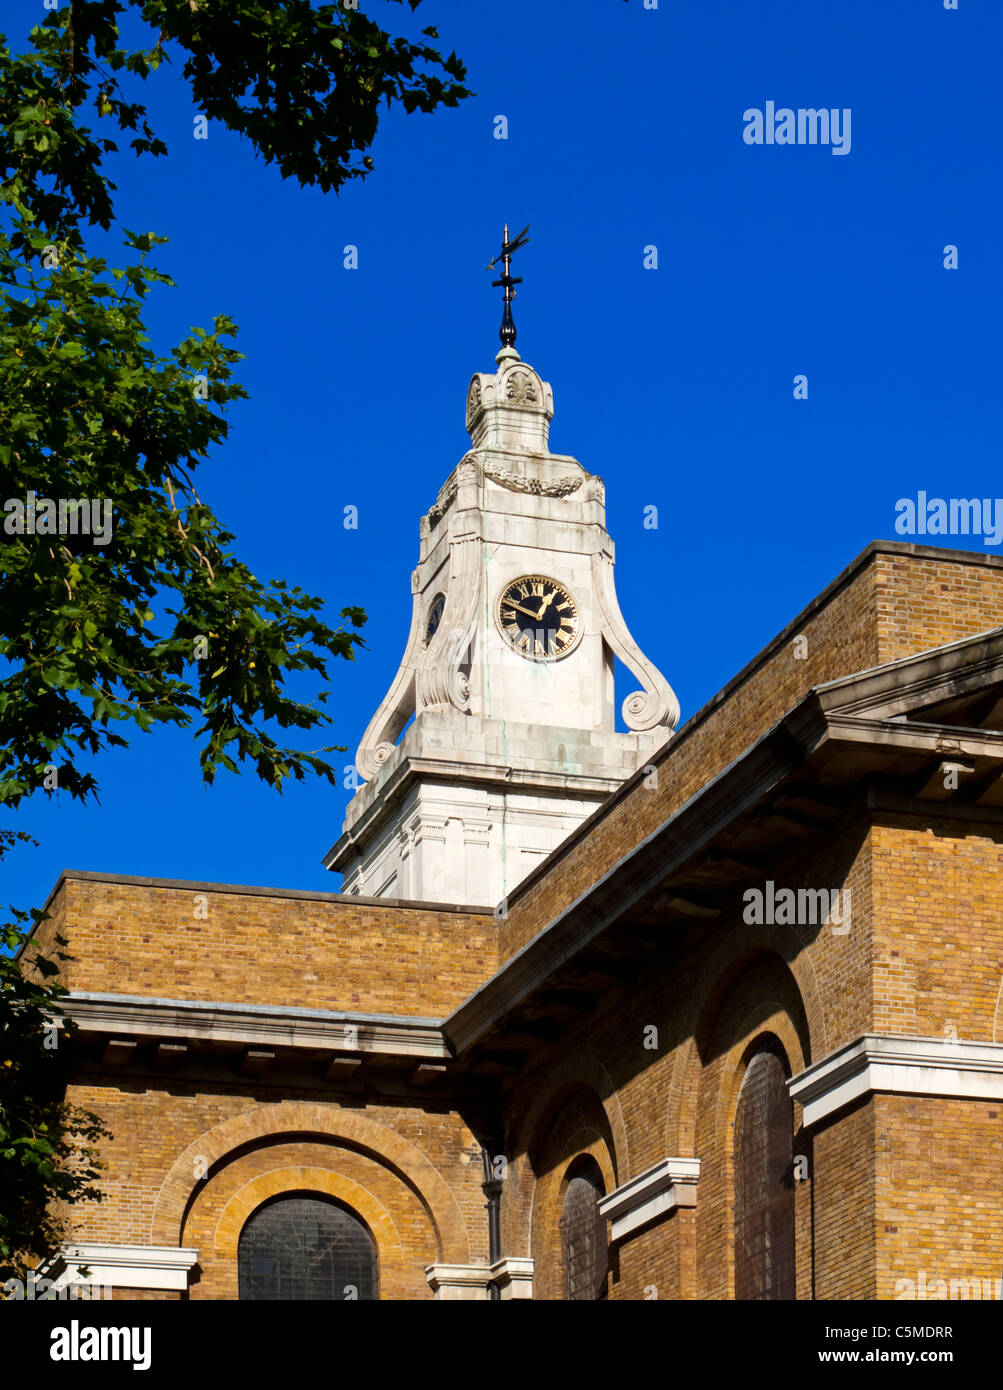 St John at Hackney Church in East London designed by James Spiller and built in 1792 in classical style with a Greek cross plan Stock Photo